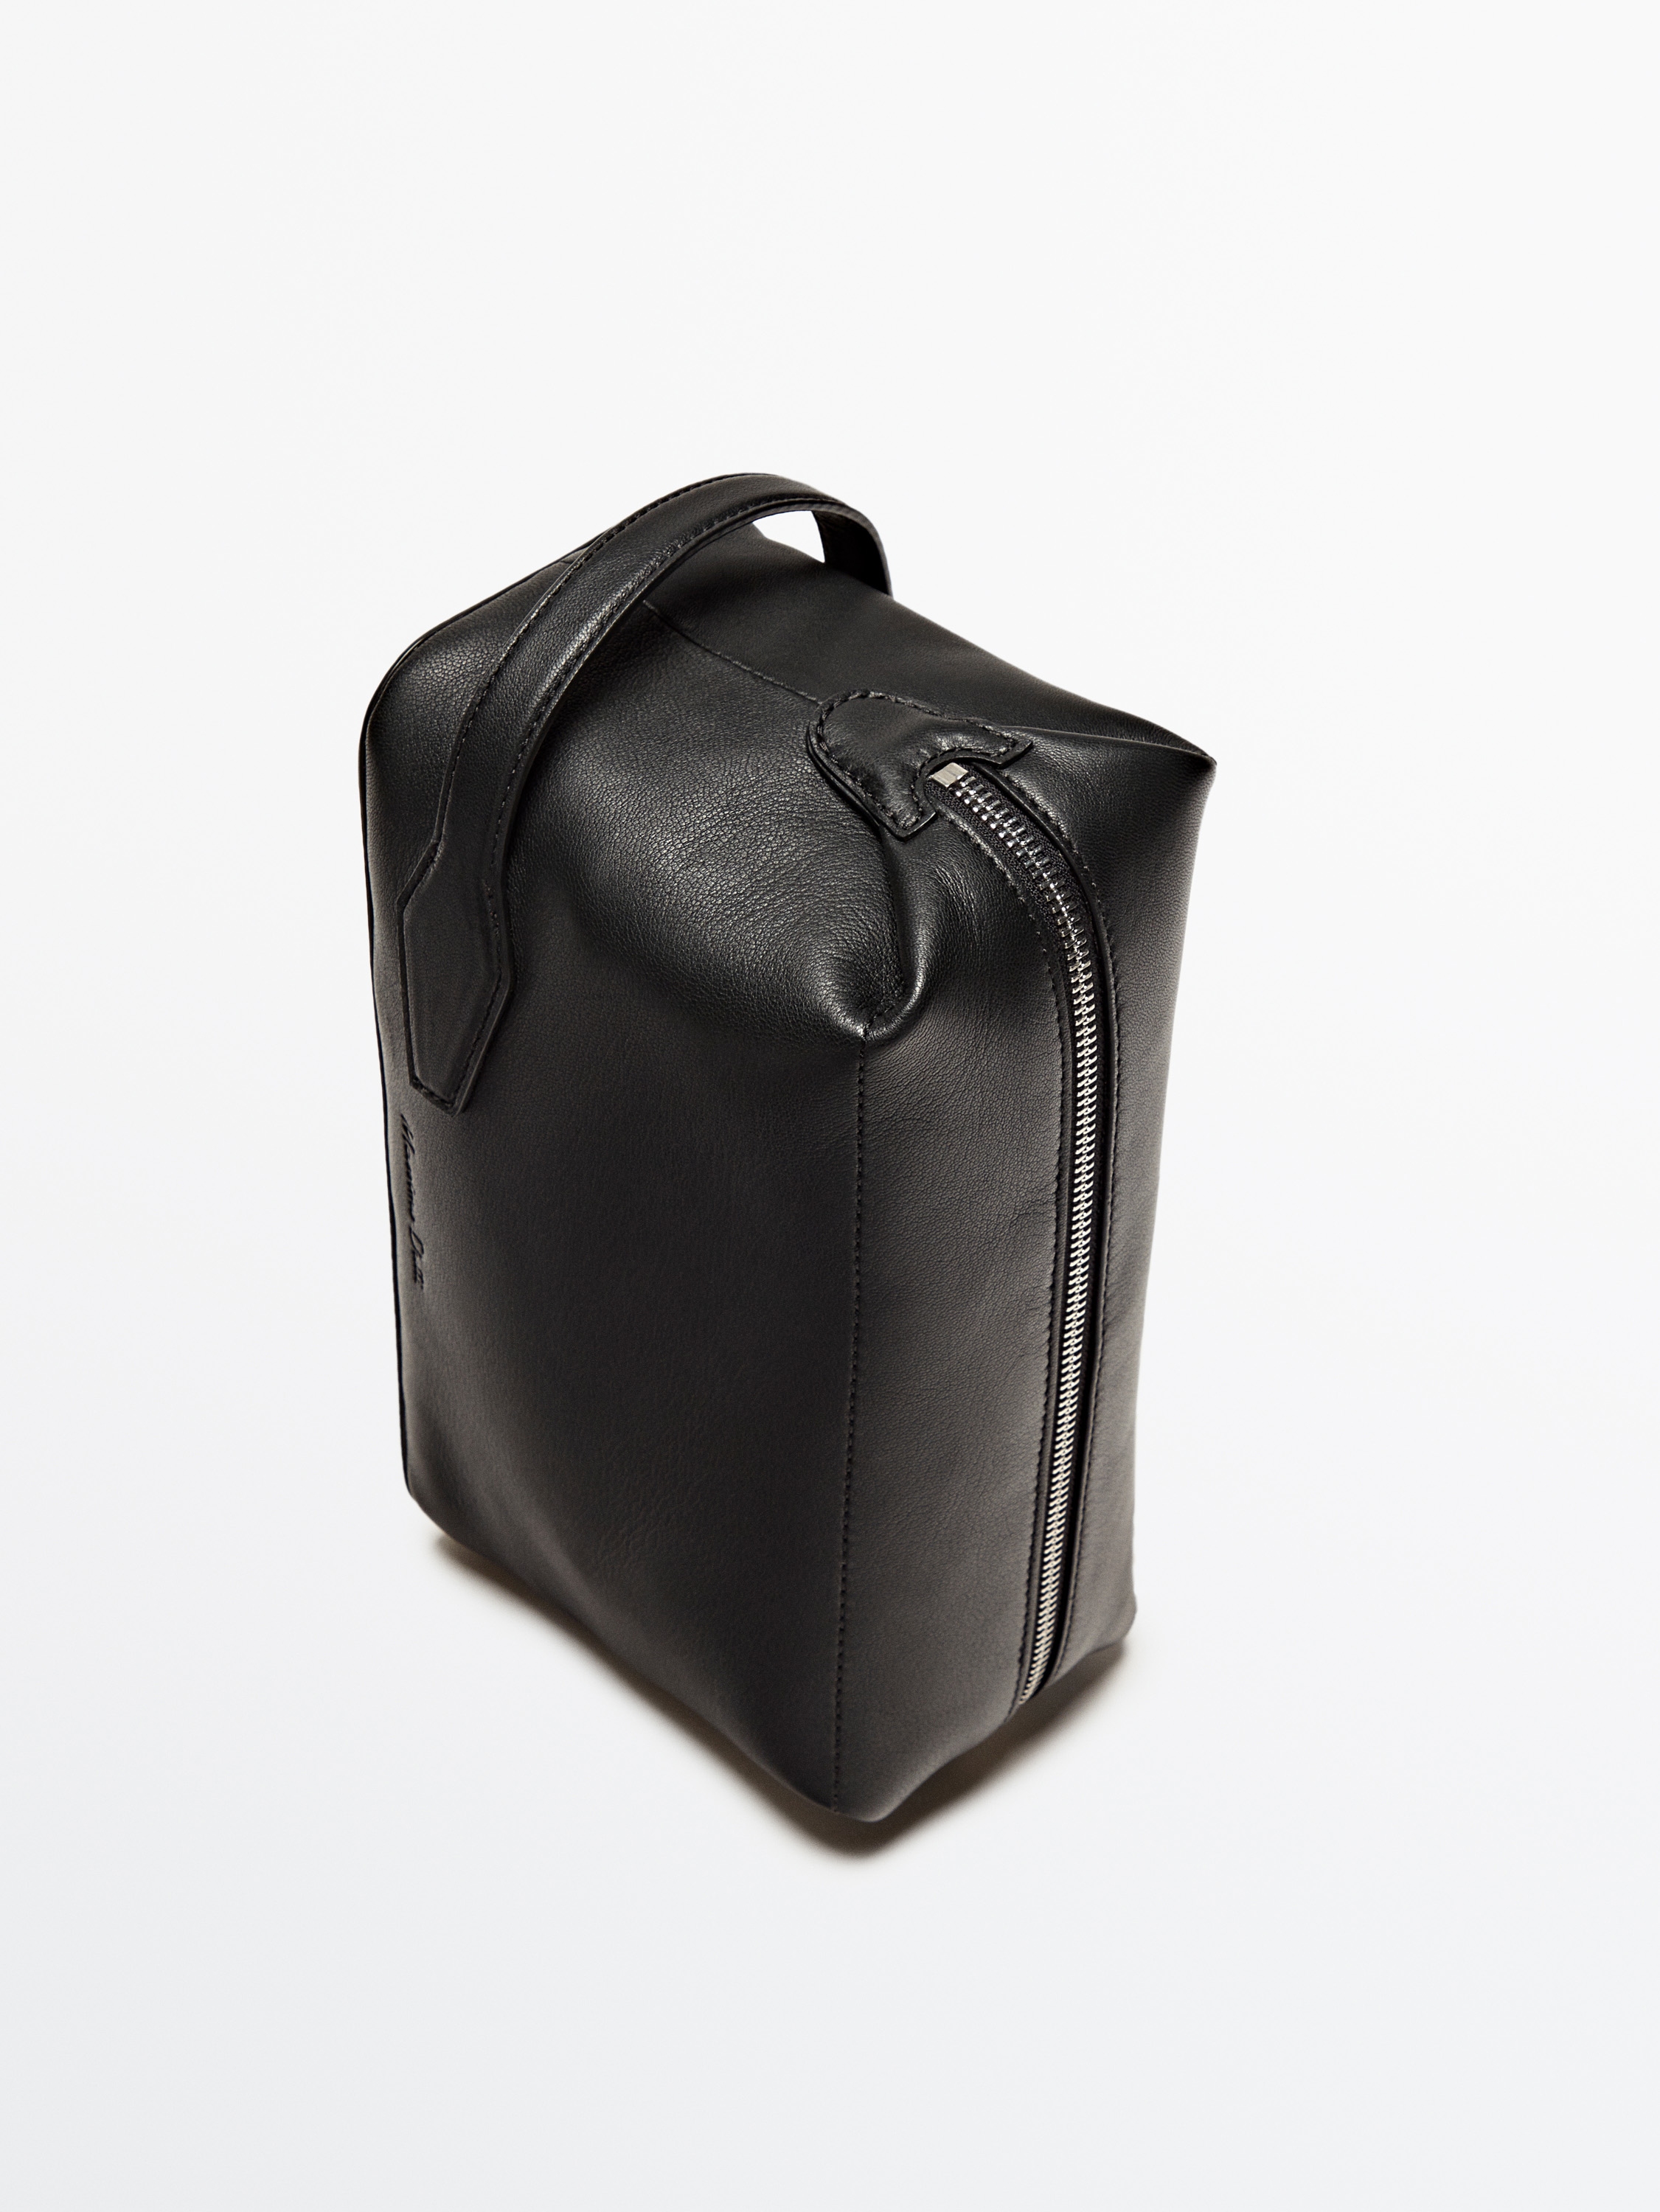 Nappa leather toiletry bag with zip